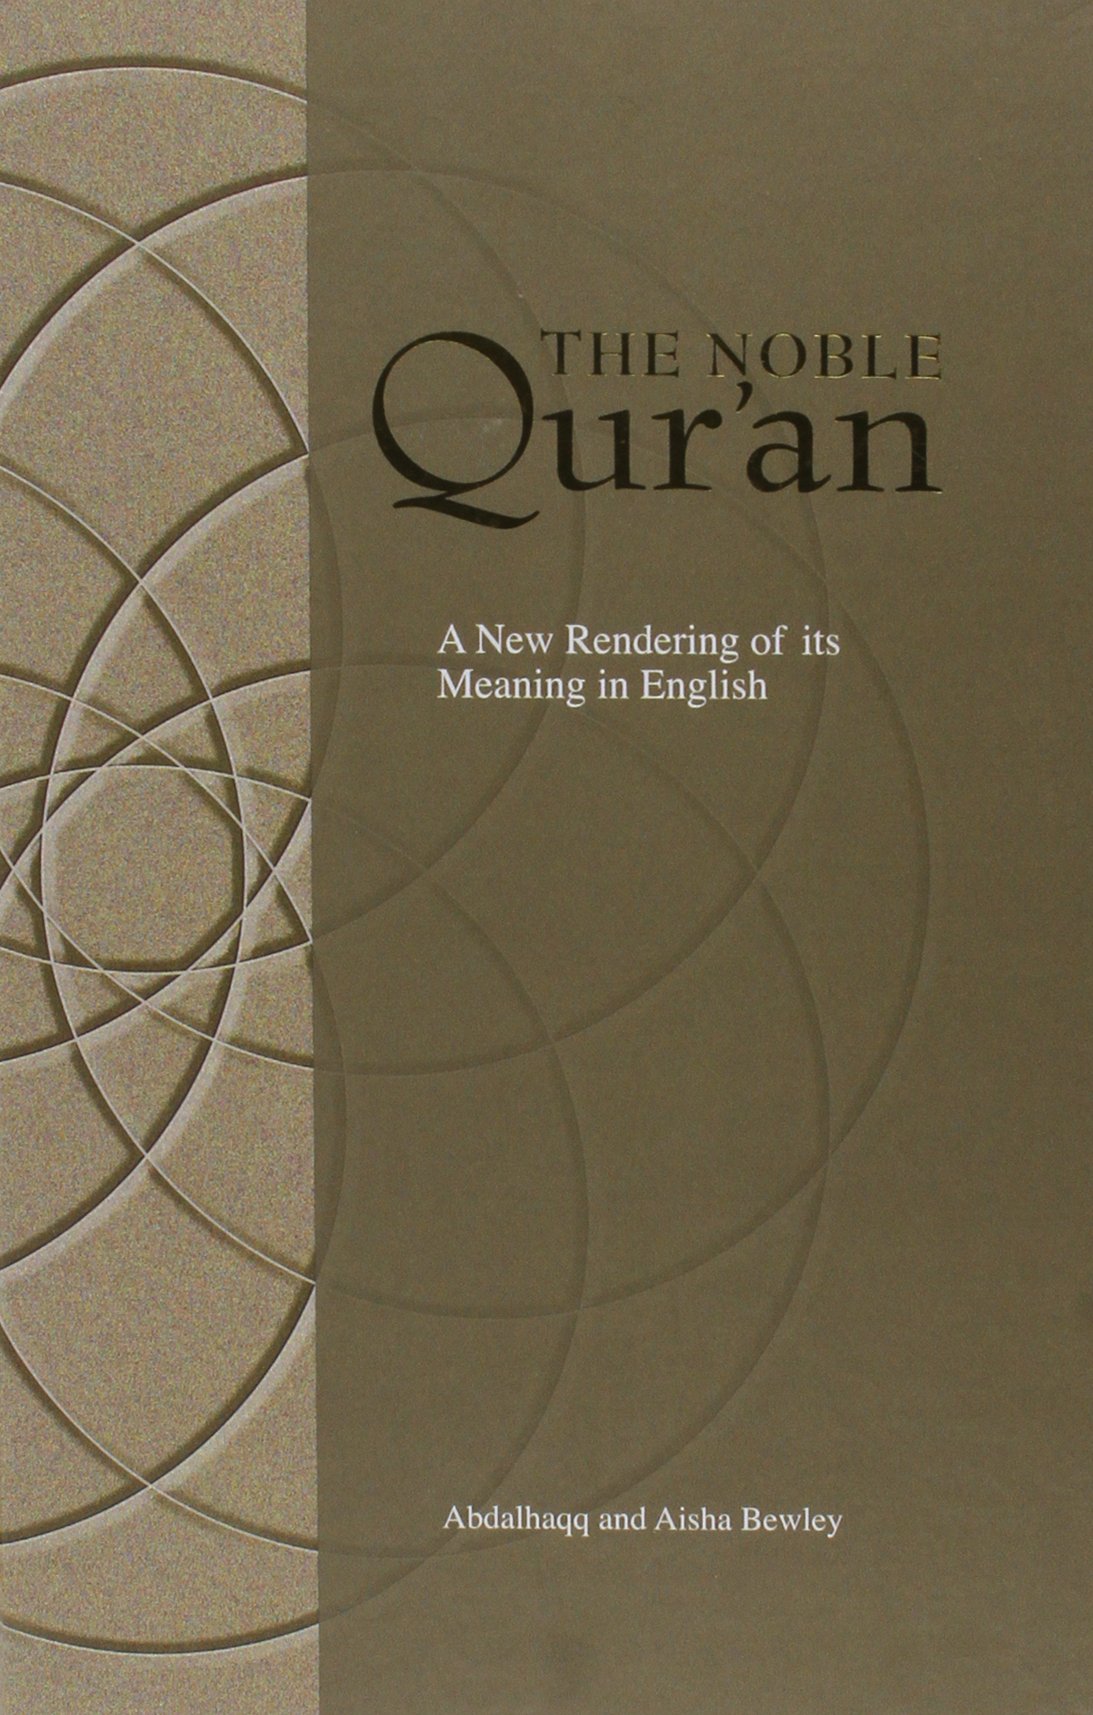 The Noble Qur'an: A New Rendering of Its Meaning in English - Abdalhaqq Bewley, Aisha Abdurrahman Bewley (Authors)